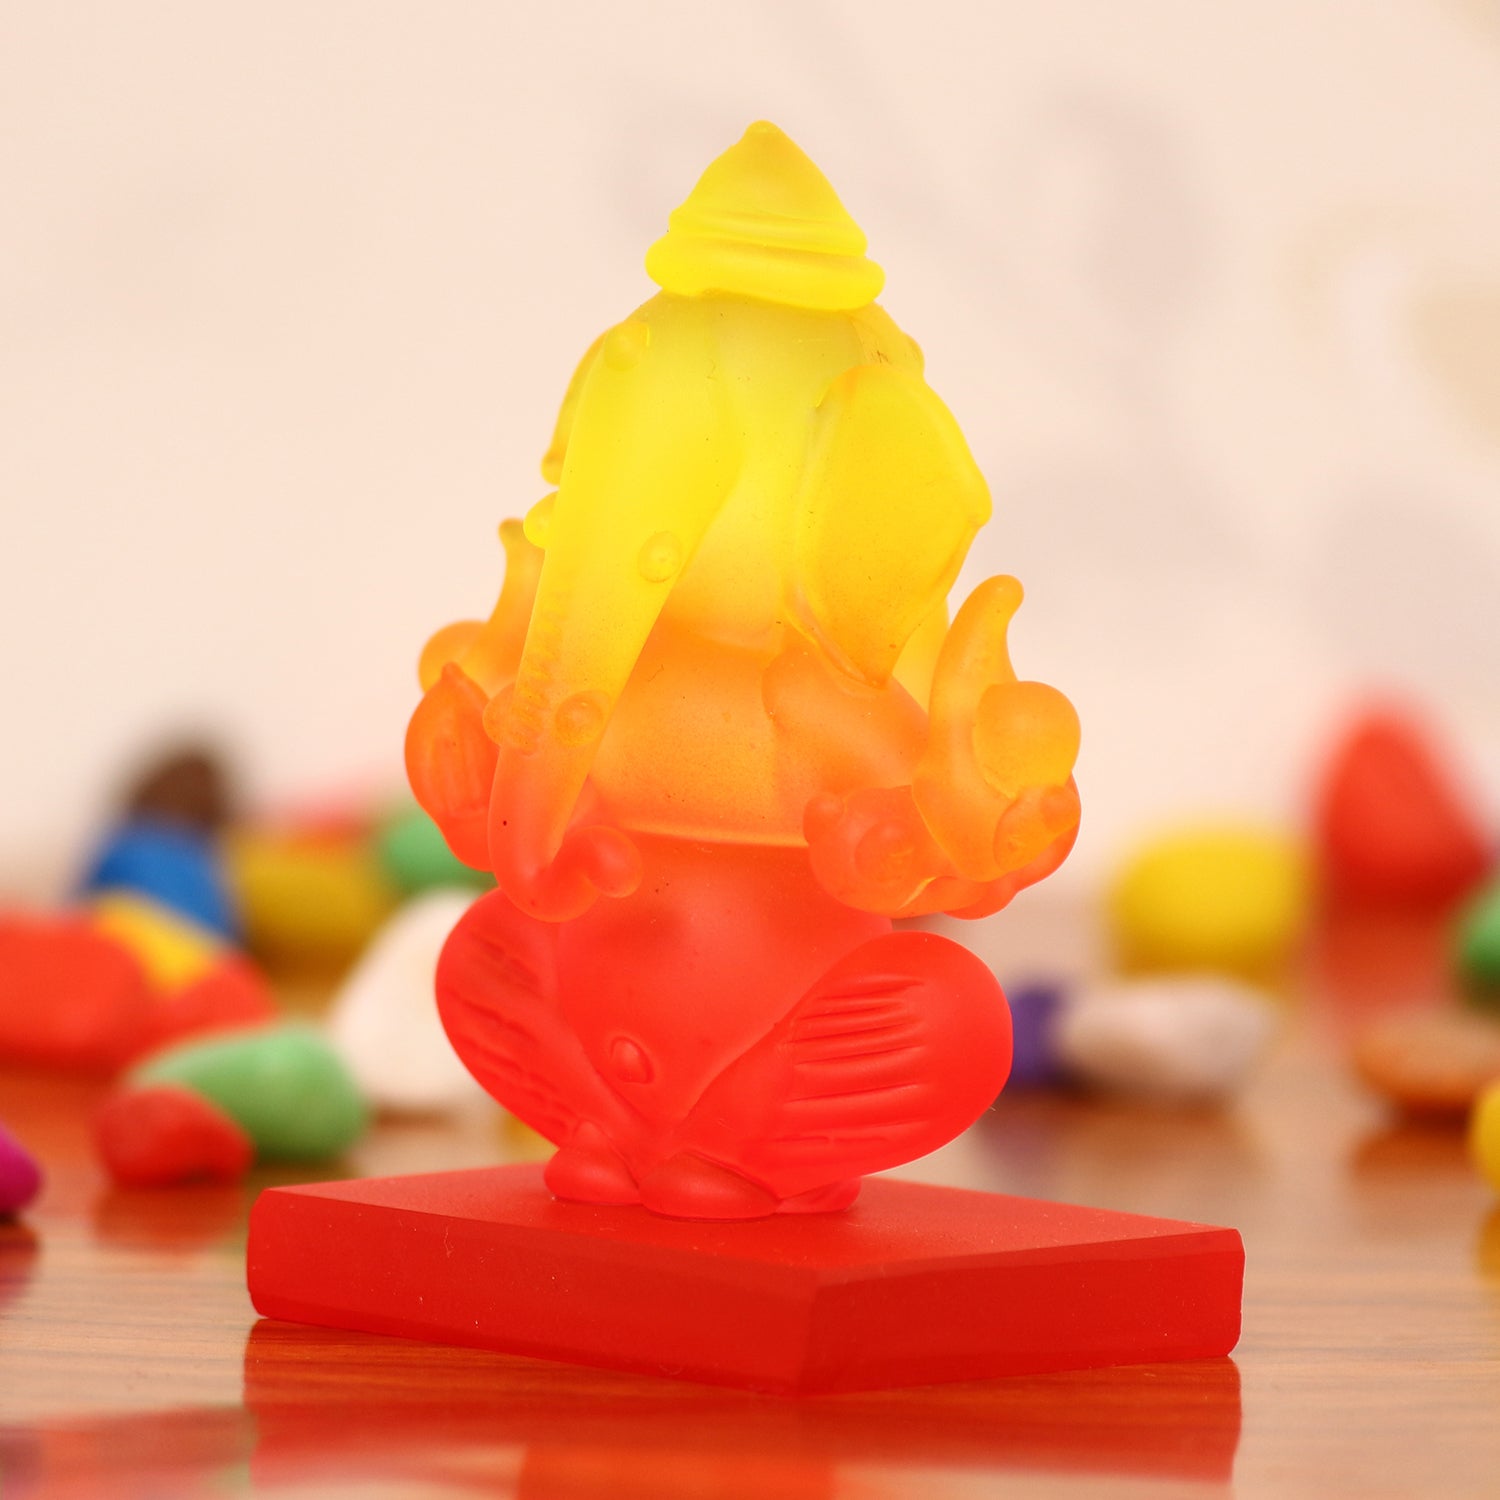 Yellow and Red Transparent Double Sided Crystal Ganesha Idol For Home, Office and Car Dashboard 2